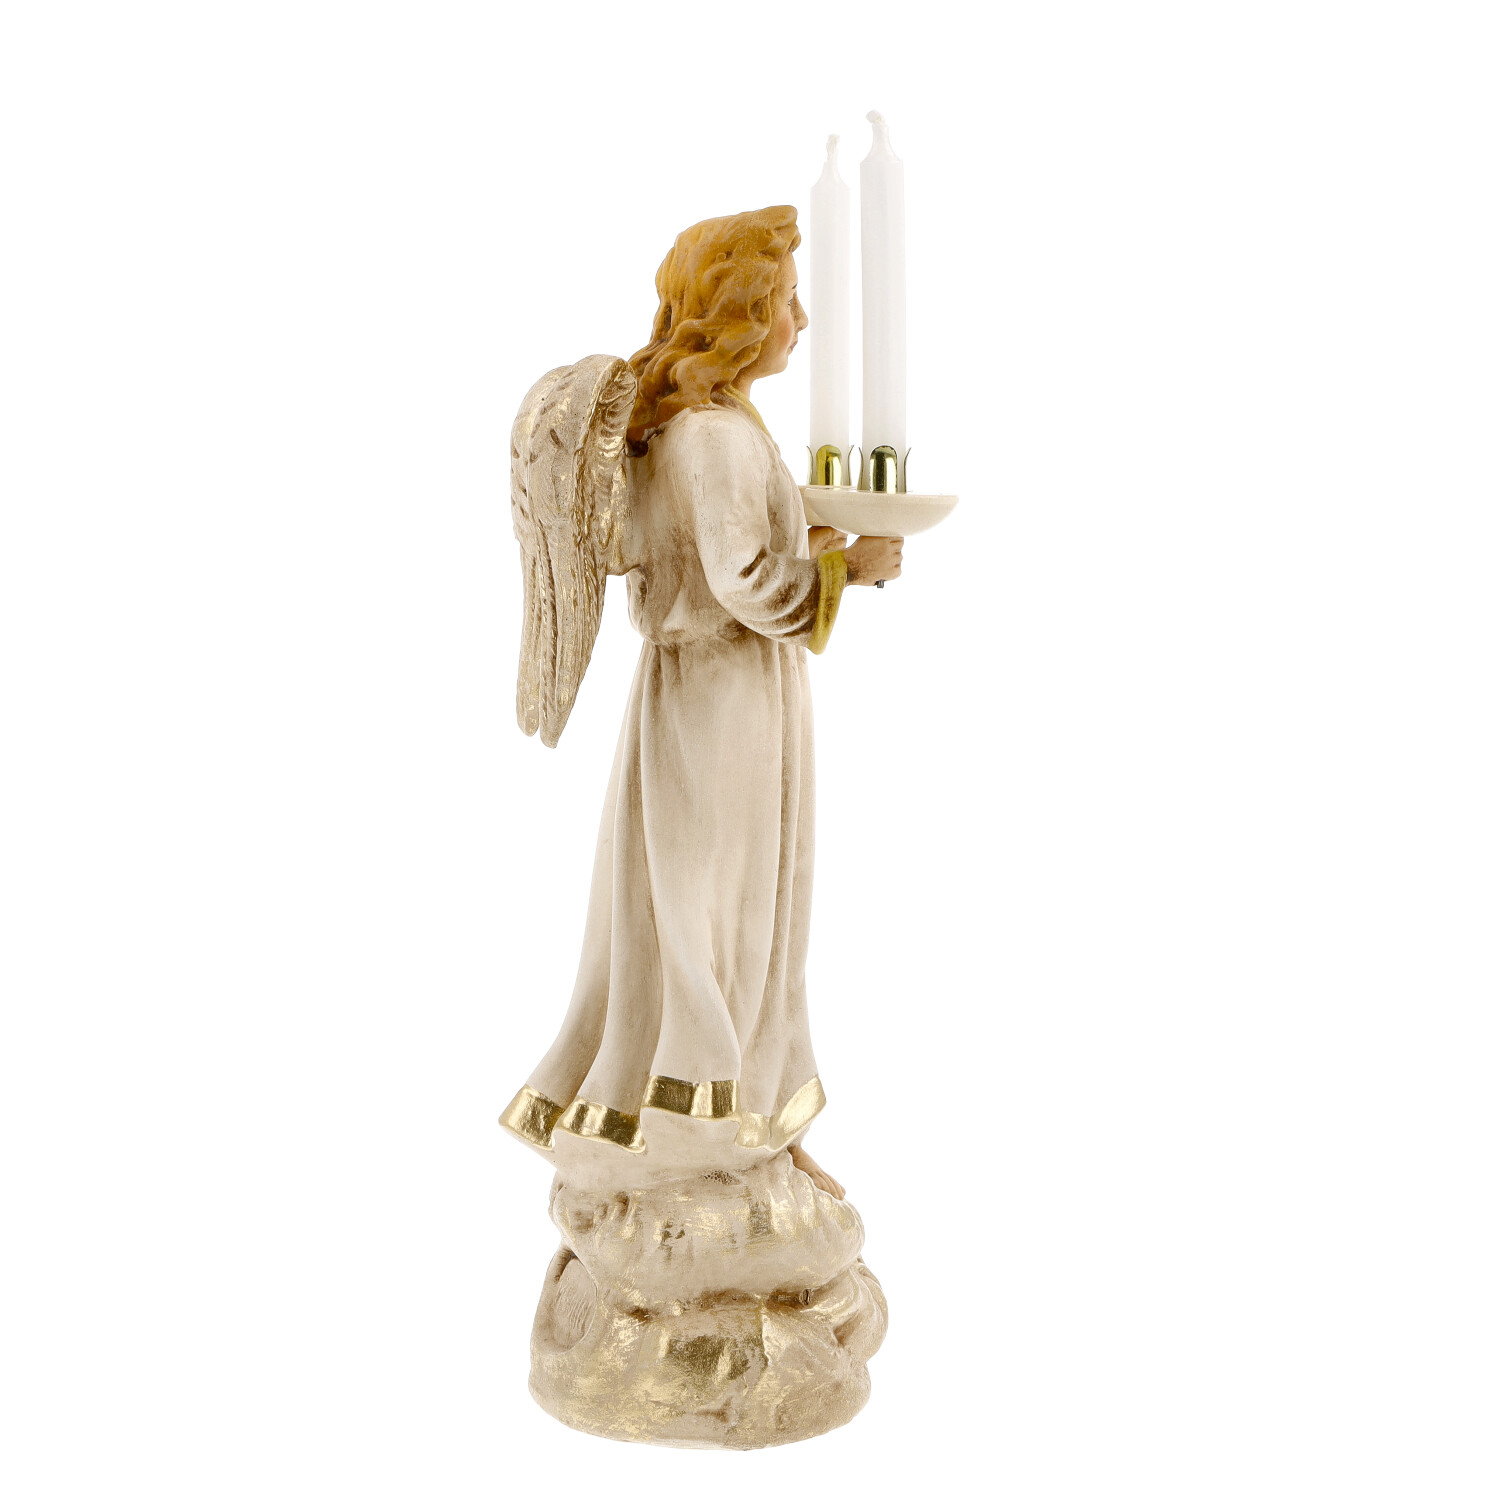 Angel with candles - Marolin Germany - handpainted